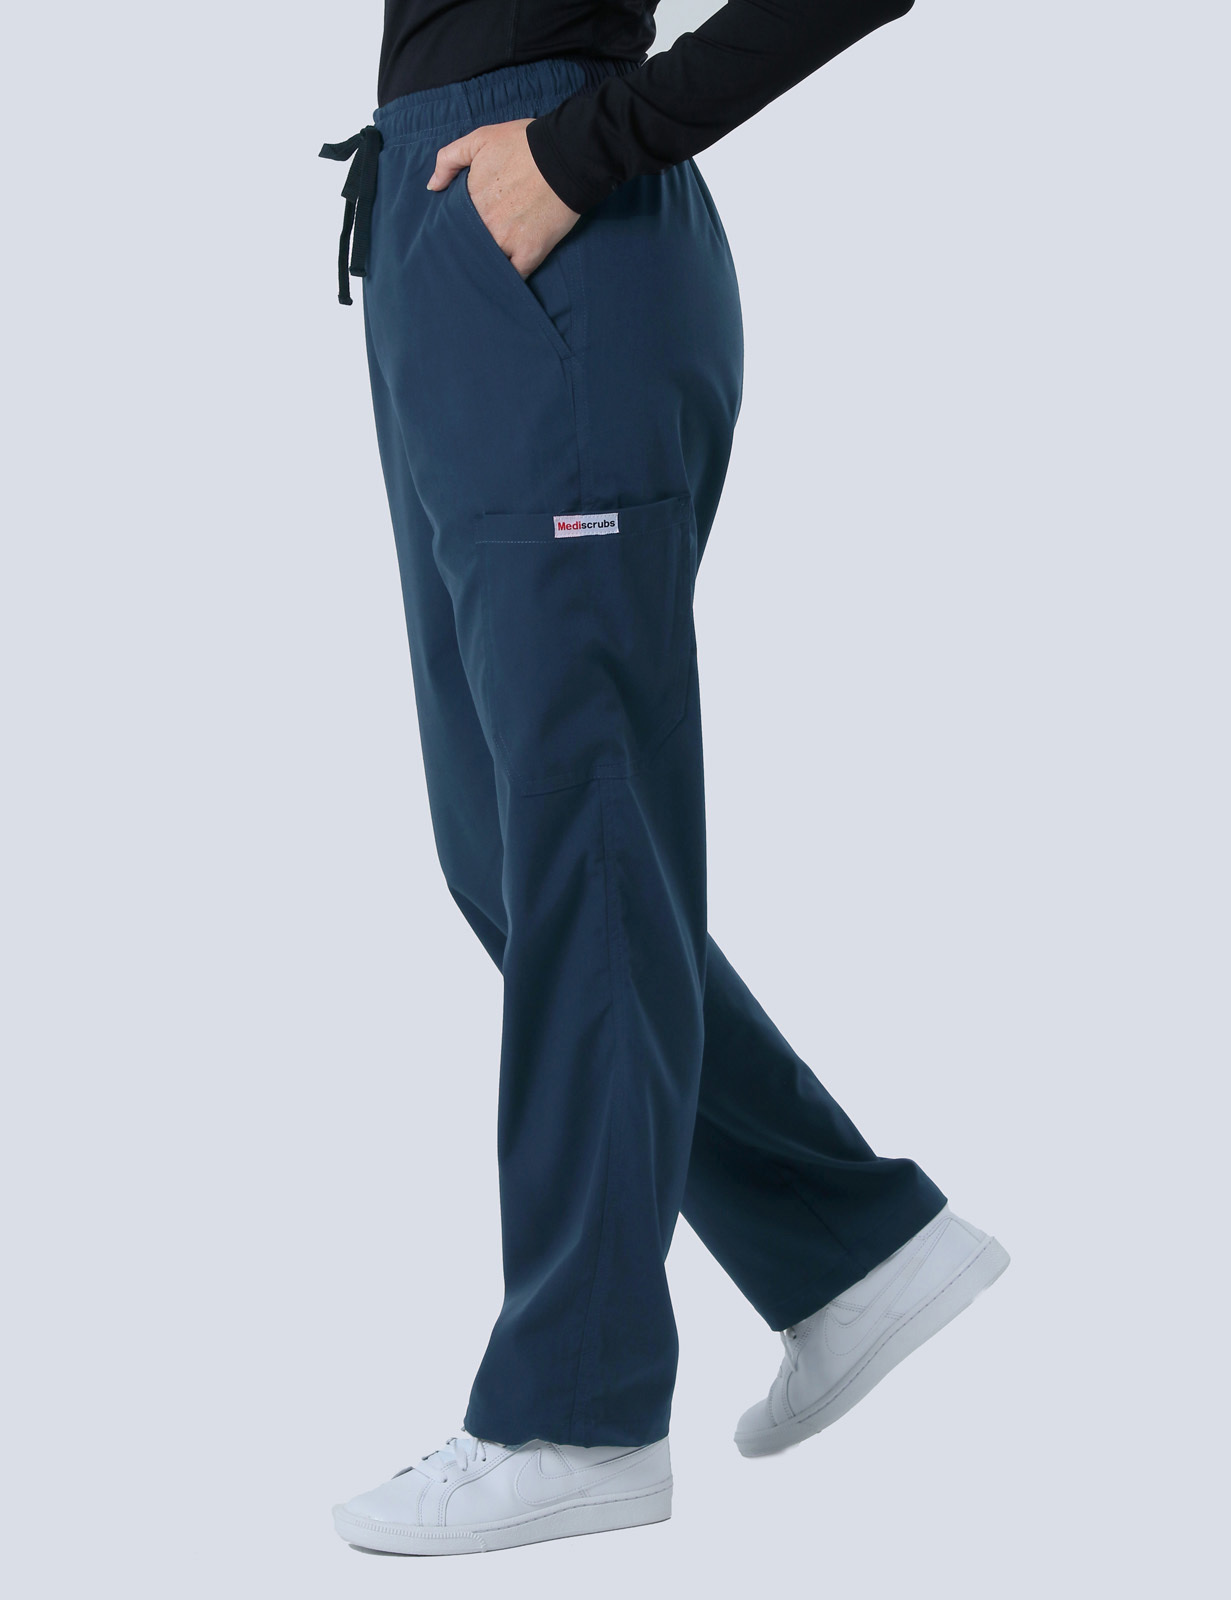 PAH - Vascular Sonographer (4 Pocket Scrub Top and Cargo Pants in Navy incl Logos)